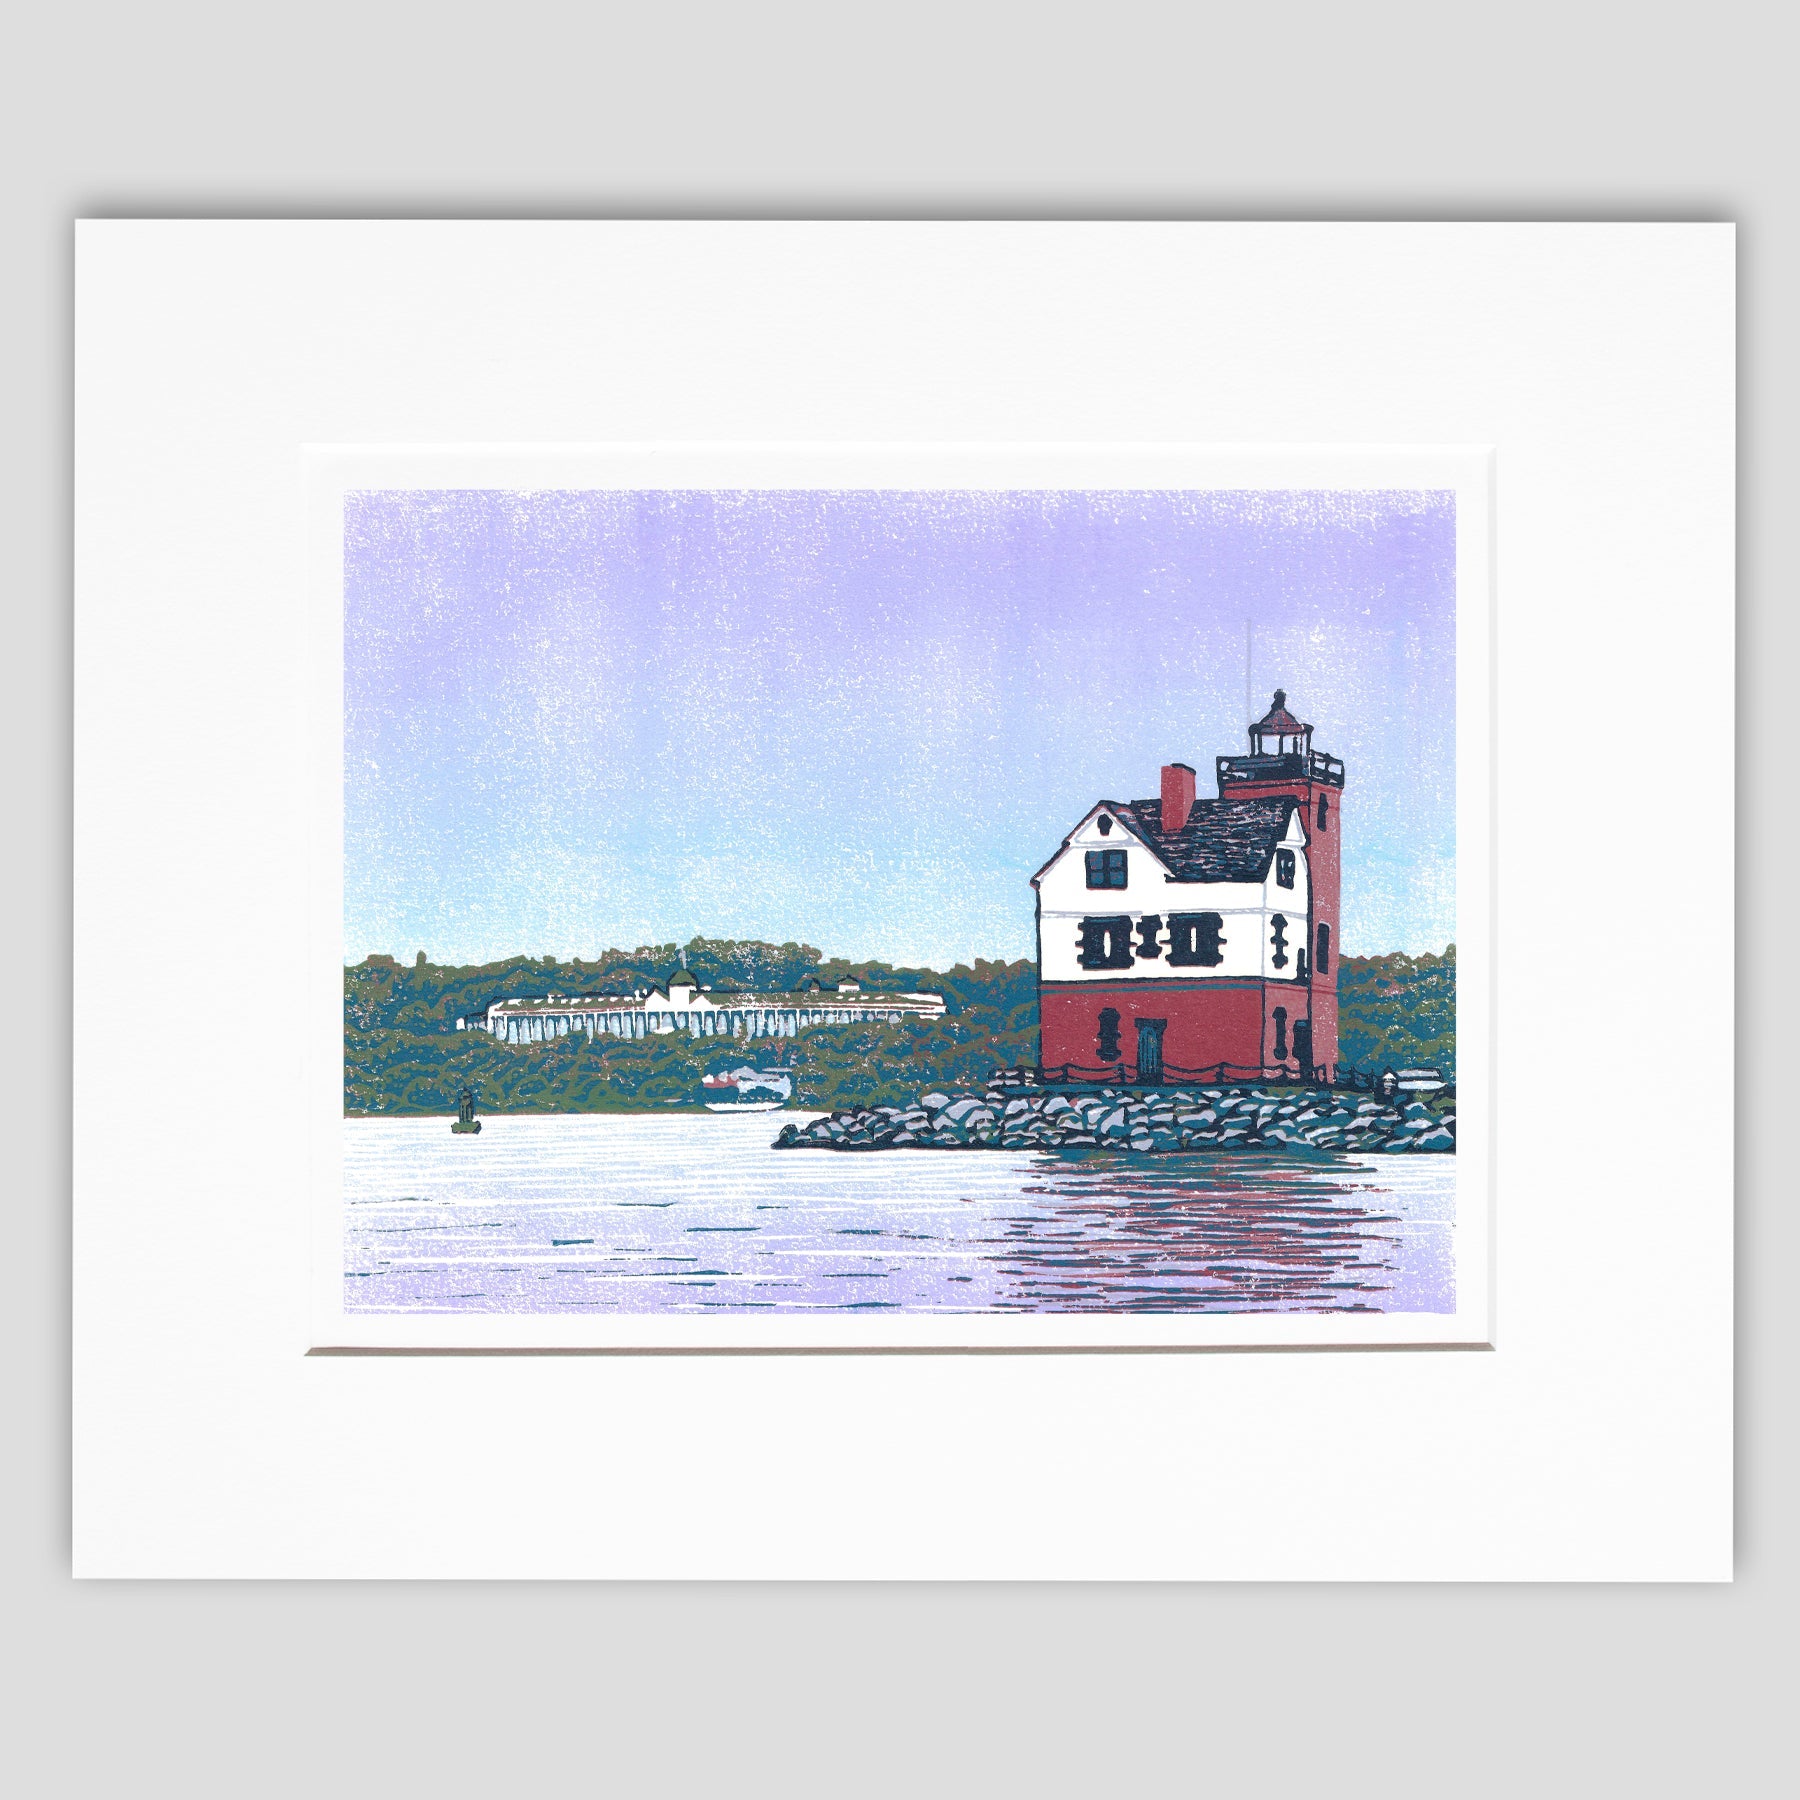 Mackinac Island art created by Natalia Wohletz of Peninsula Prints, Mackinac Island.  Rounding the Island is an 8-color reduction block print featuring a unique view of Round Island Lighthouse with Grand Hotel in the background.